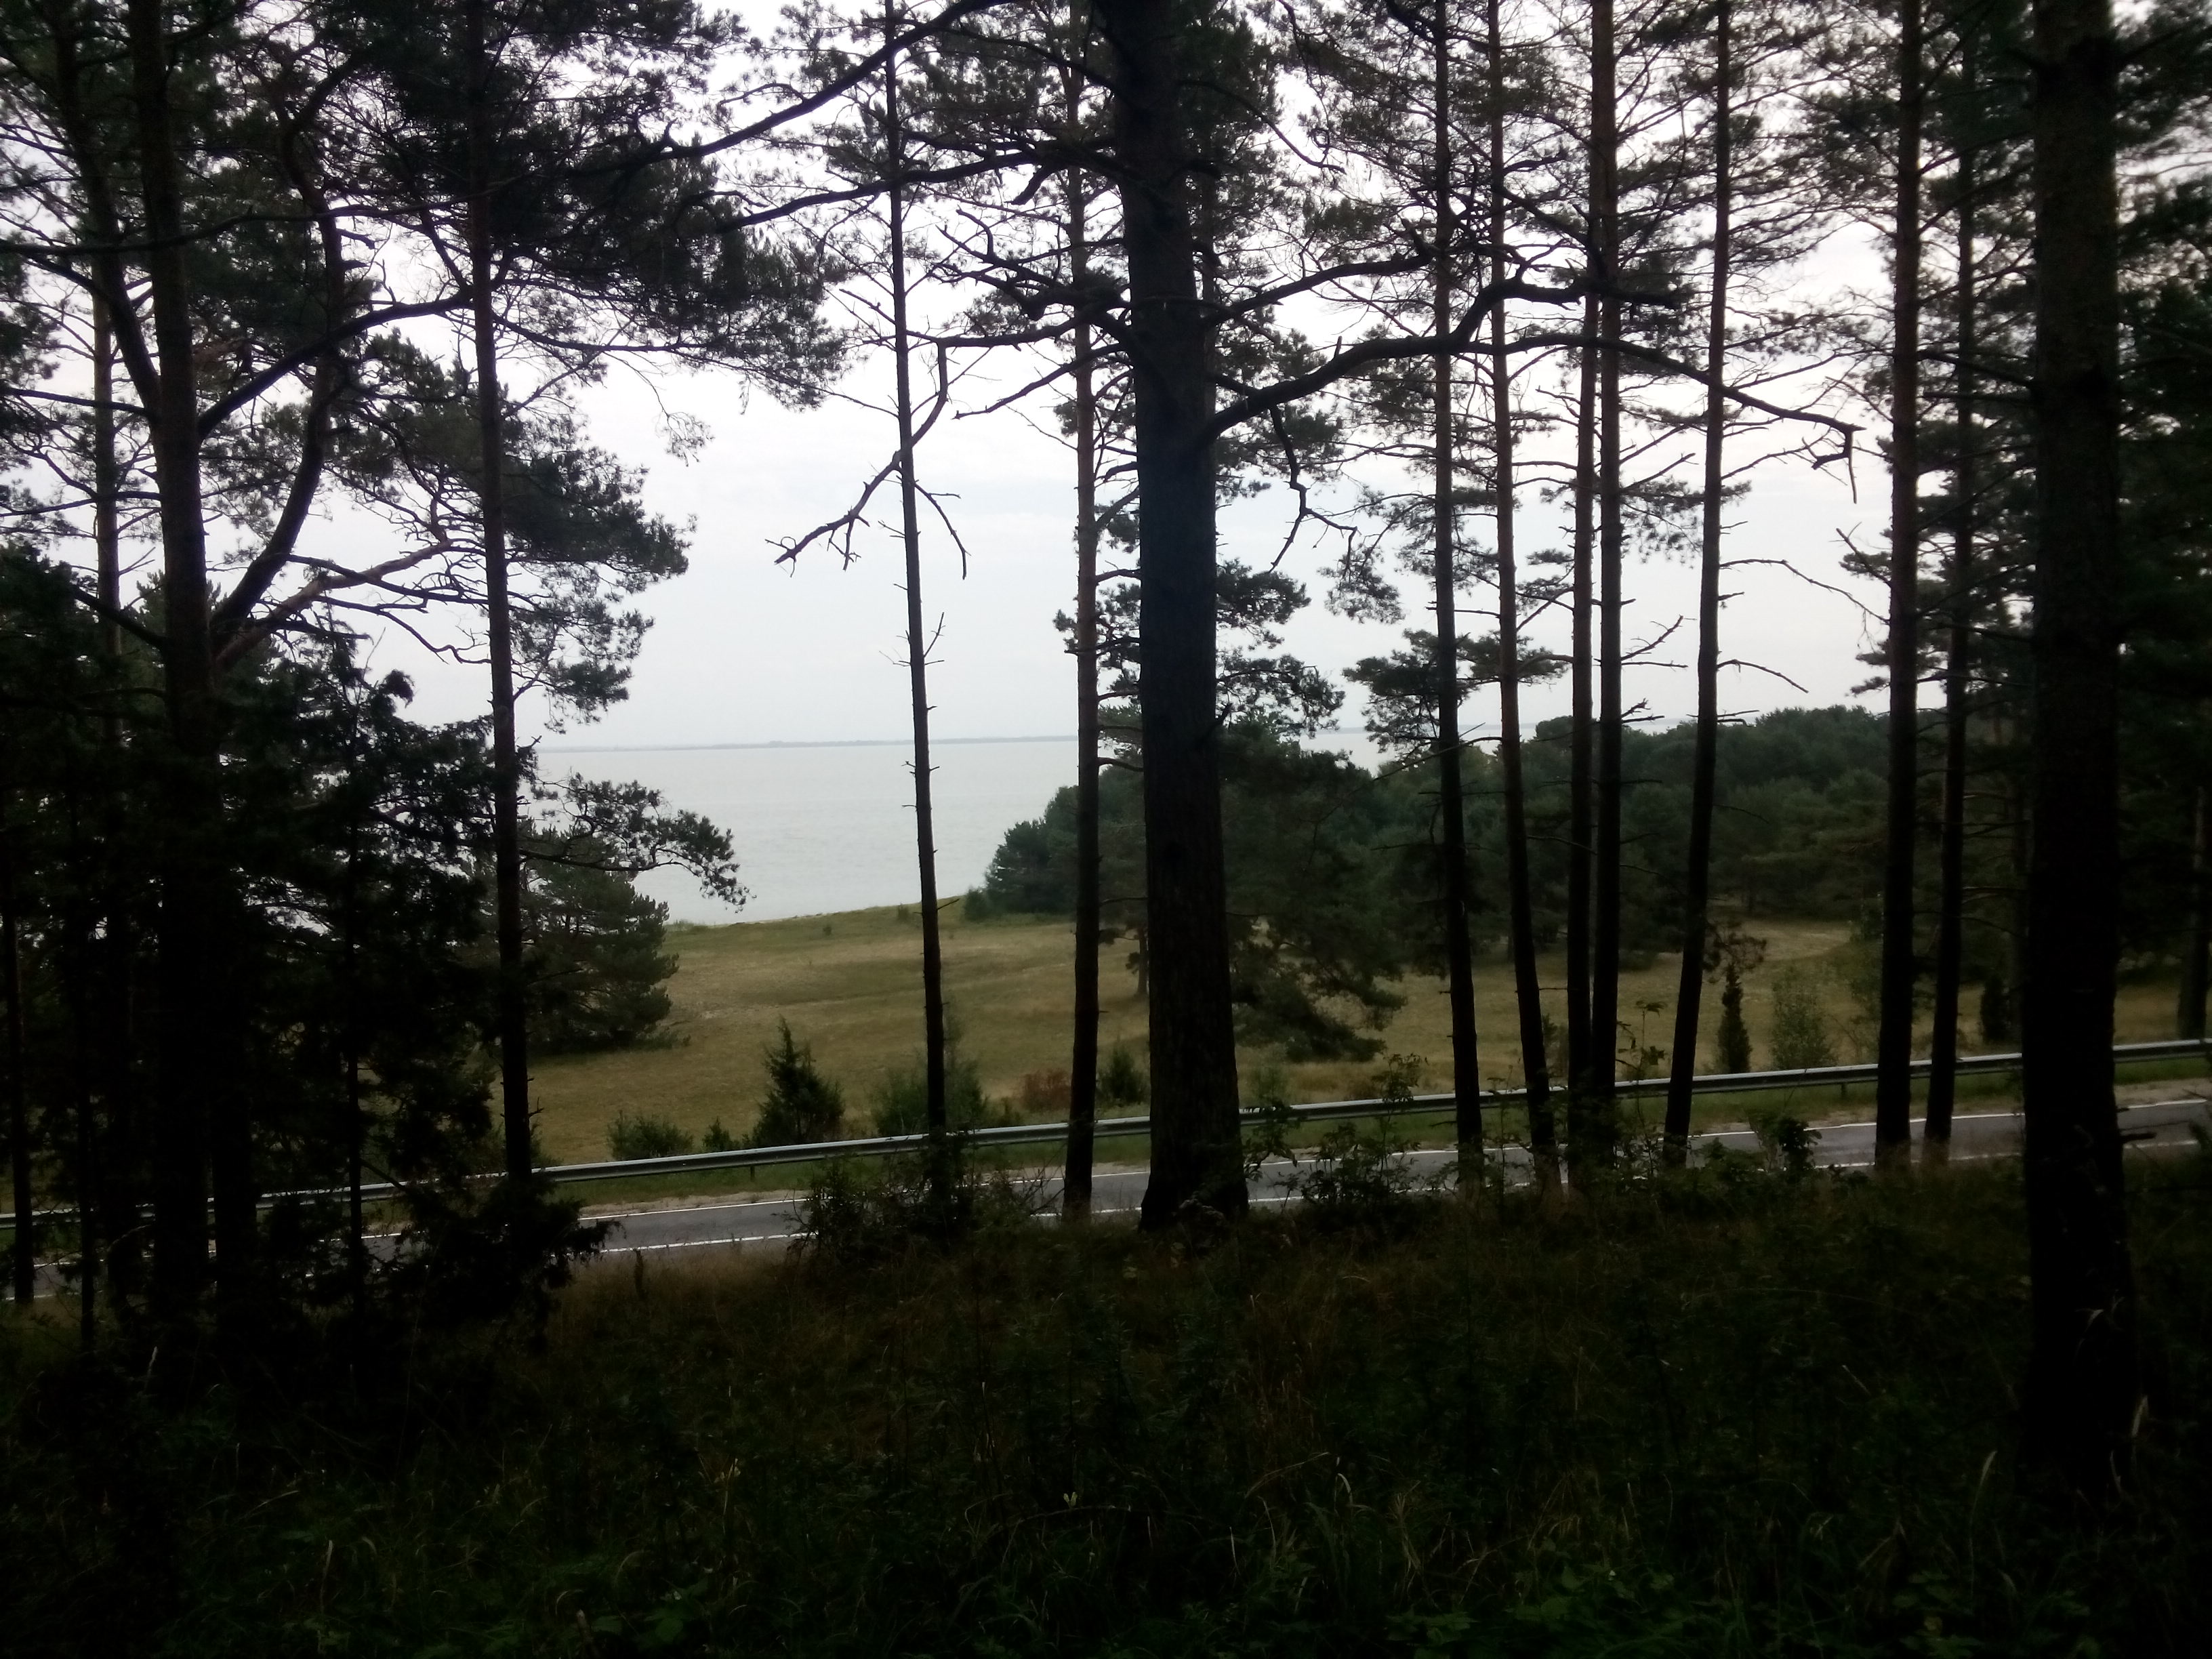 A view of a road, and beyond that the sea, with silhouettes of tall pine trees in front